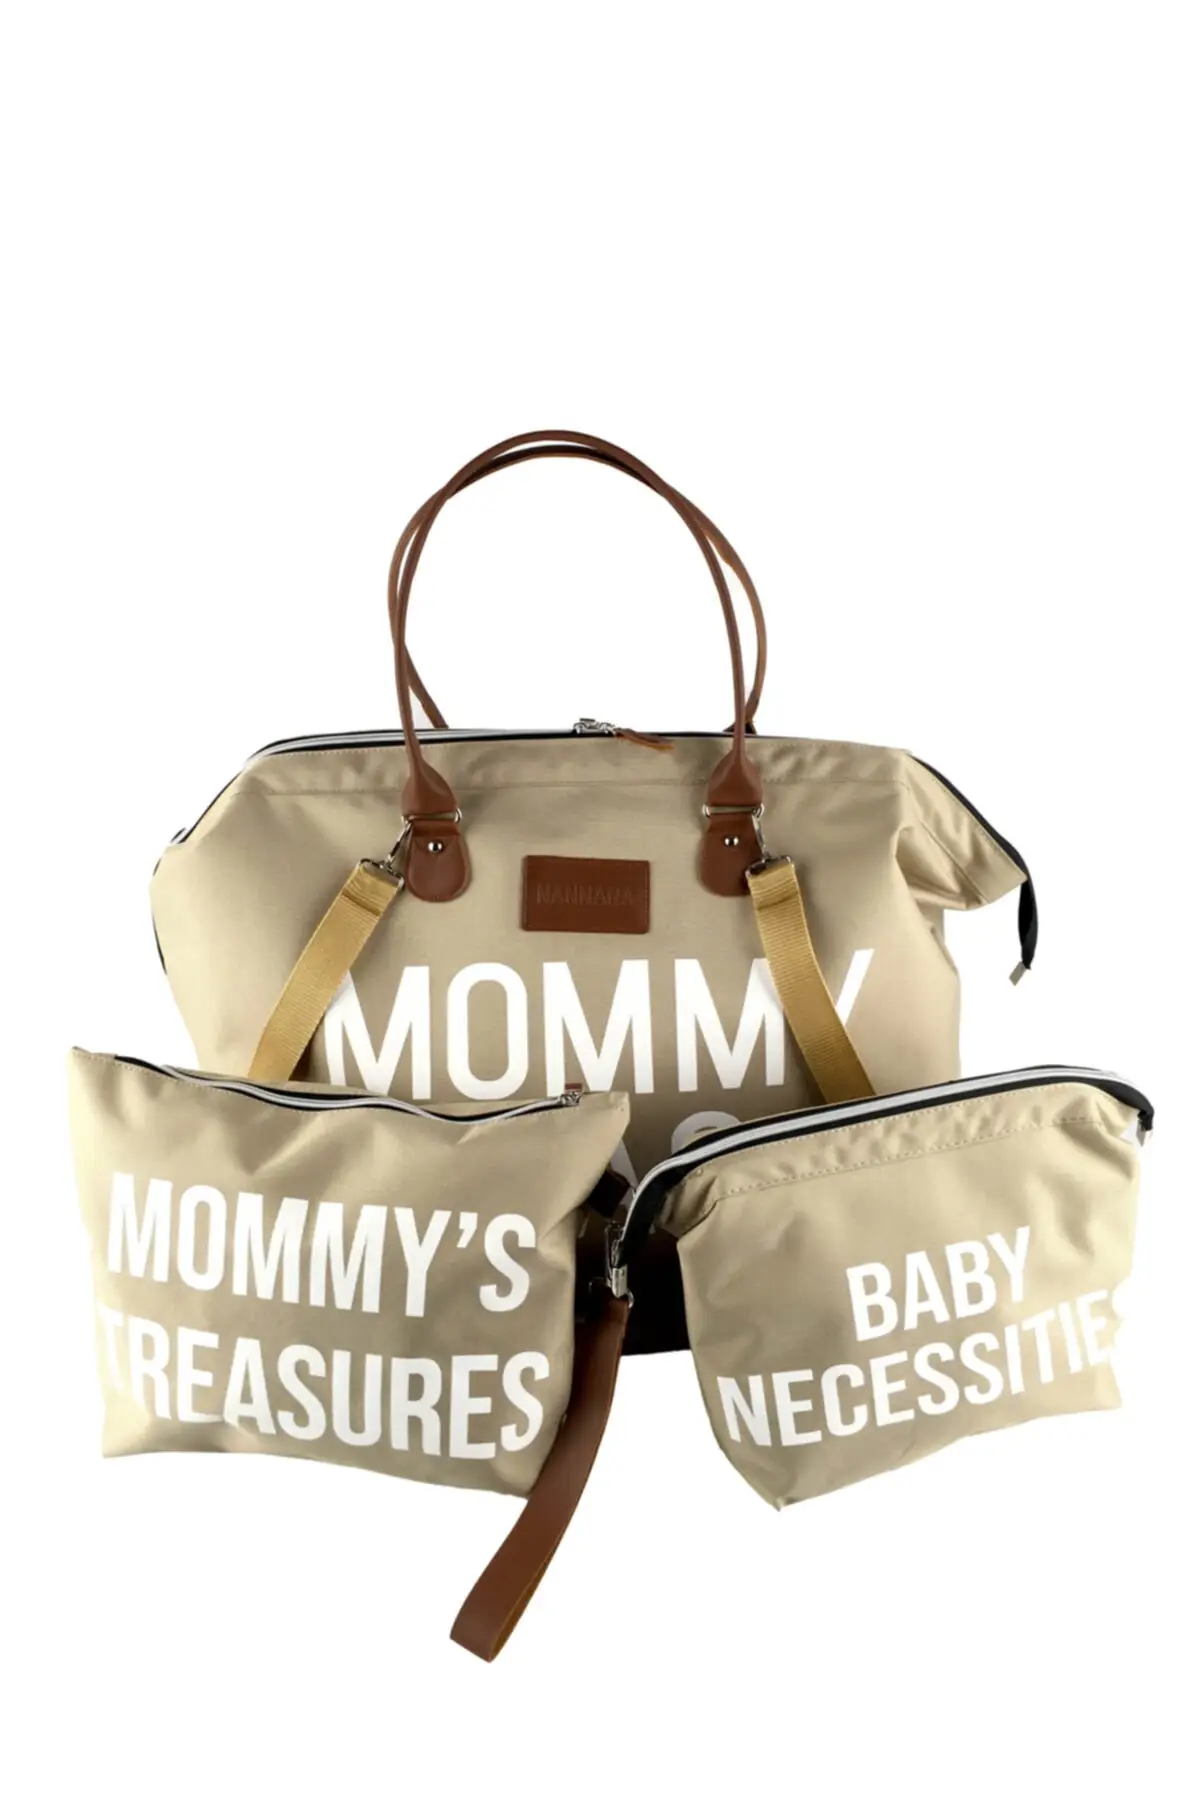 Mommy Bag 3 PCs Set Mother Baby Care And Tote Bag 5 Different Color Large Volume Durable Fabric Quality